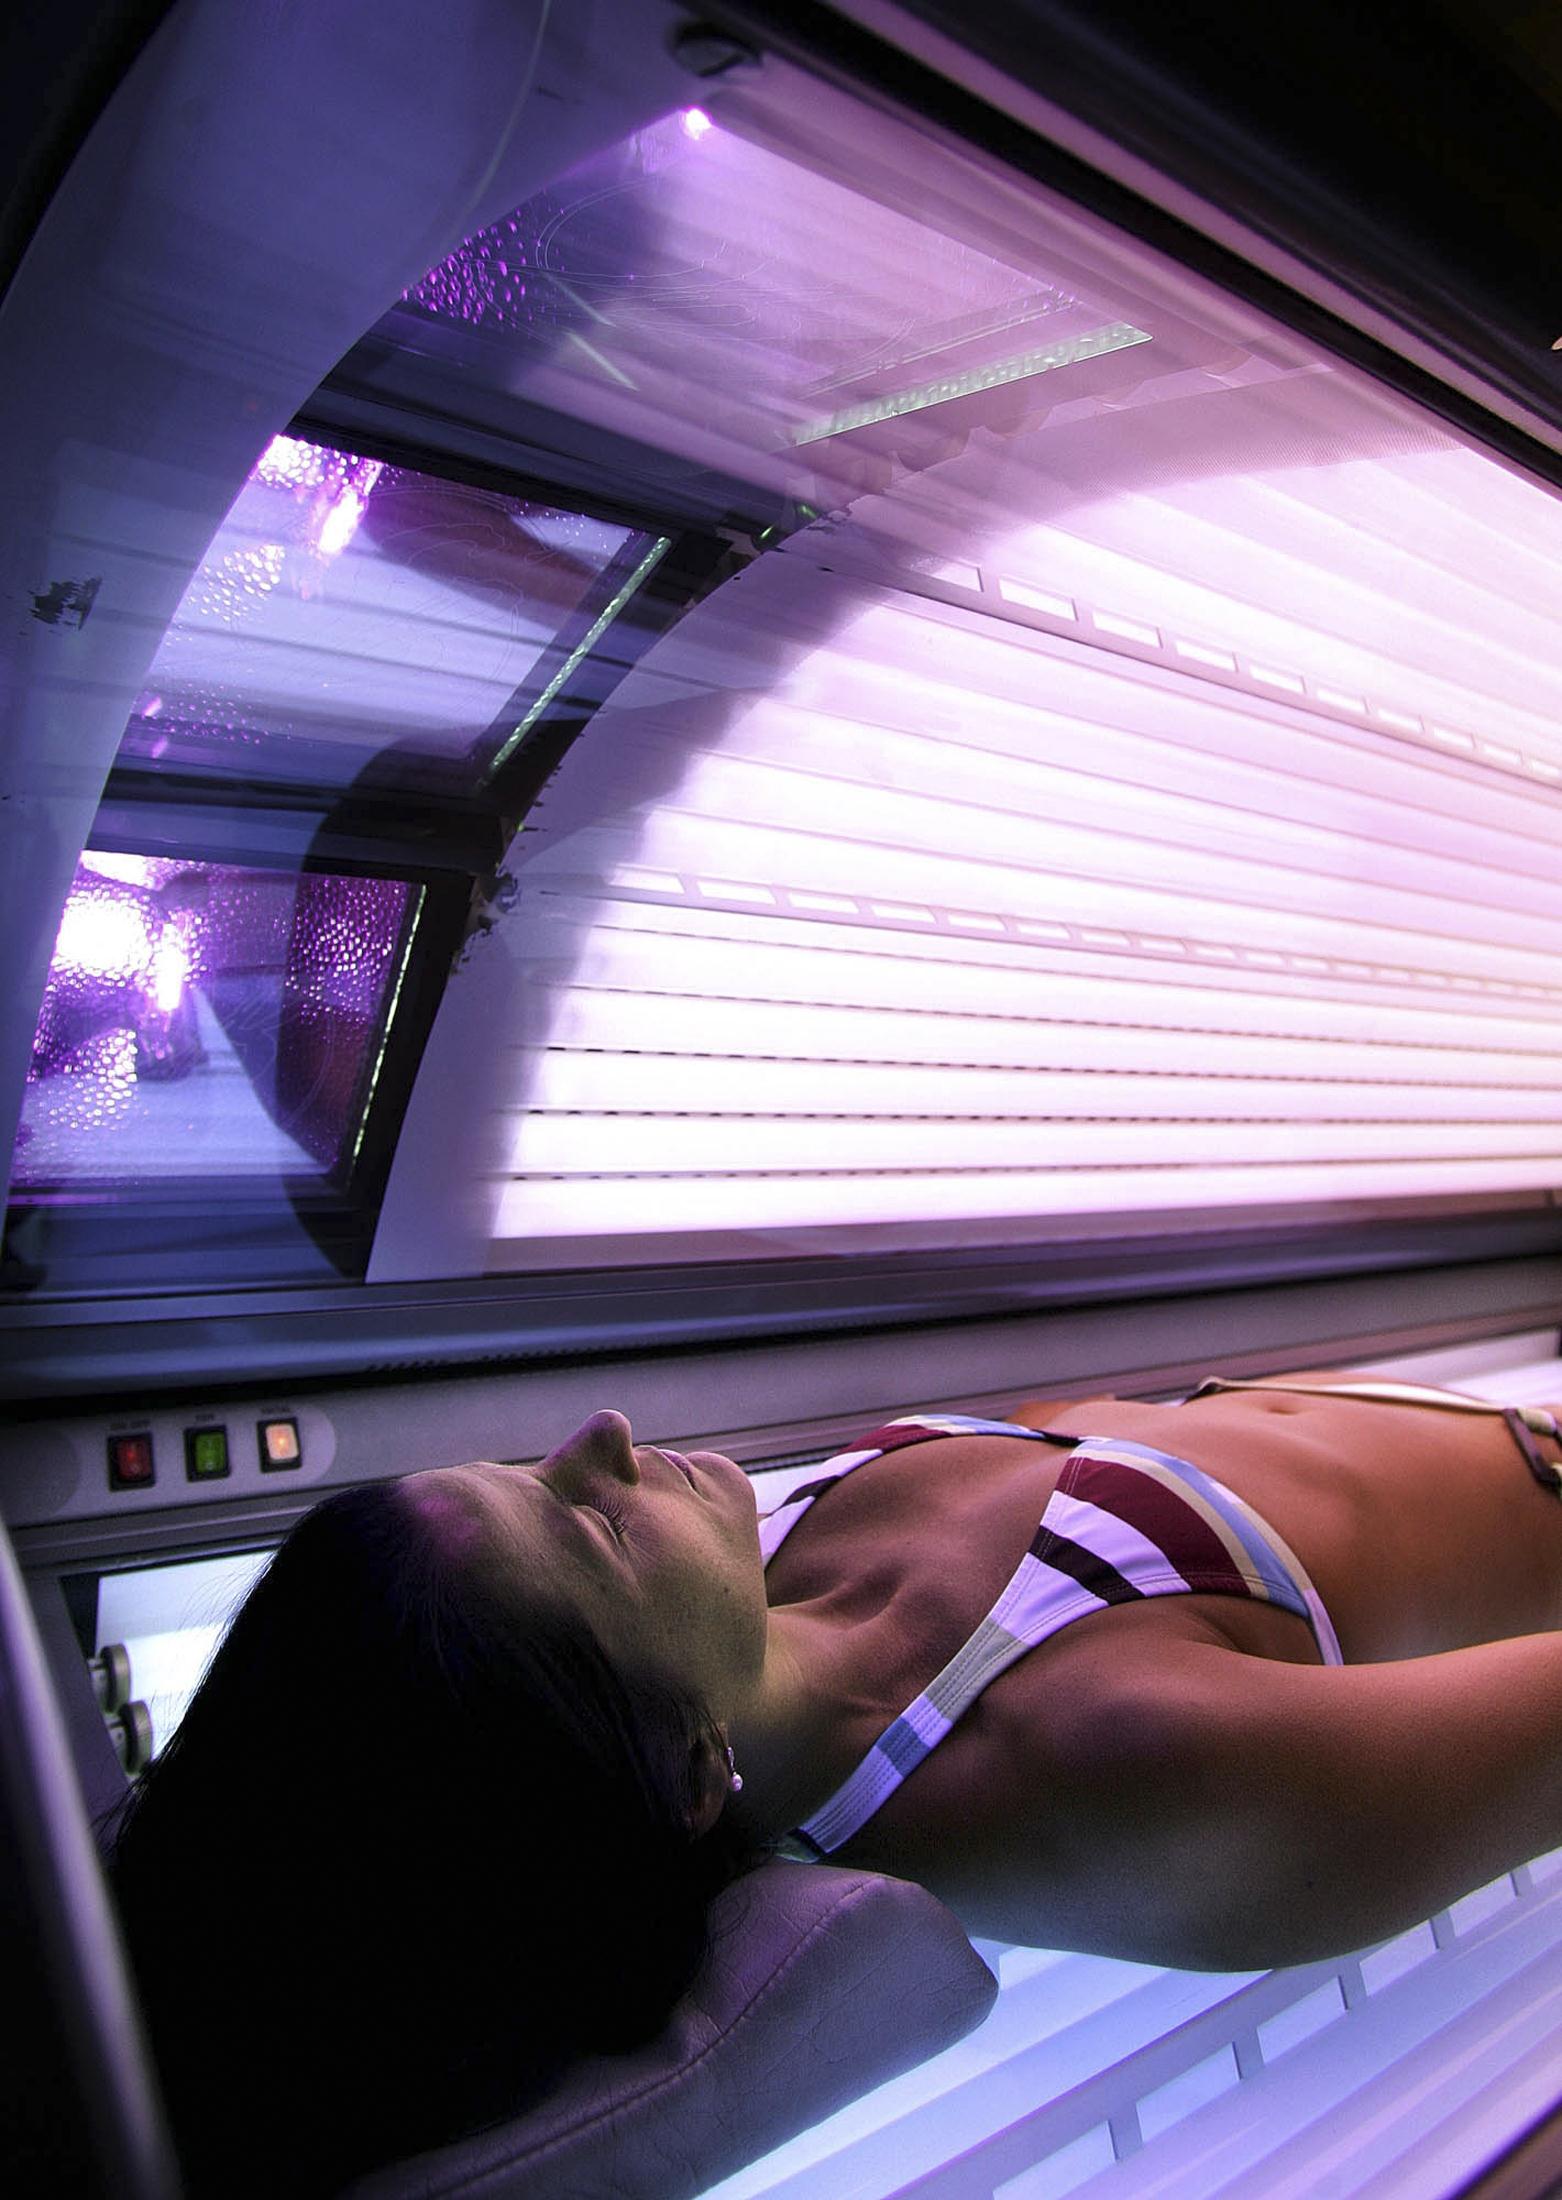 A woman lies in a tanning booth in Anchorage, Alaska on Dec 15, 2005. (Al Grillo—AP)